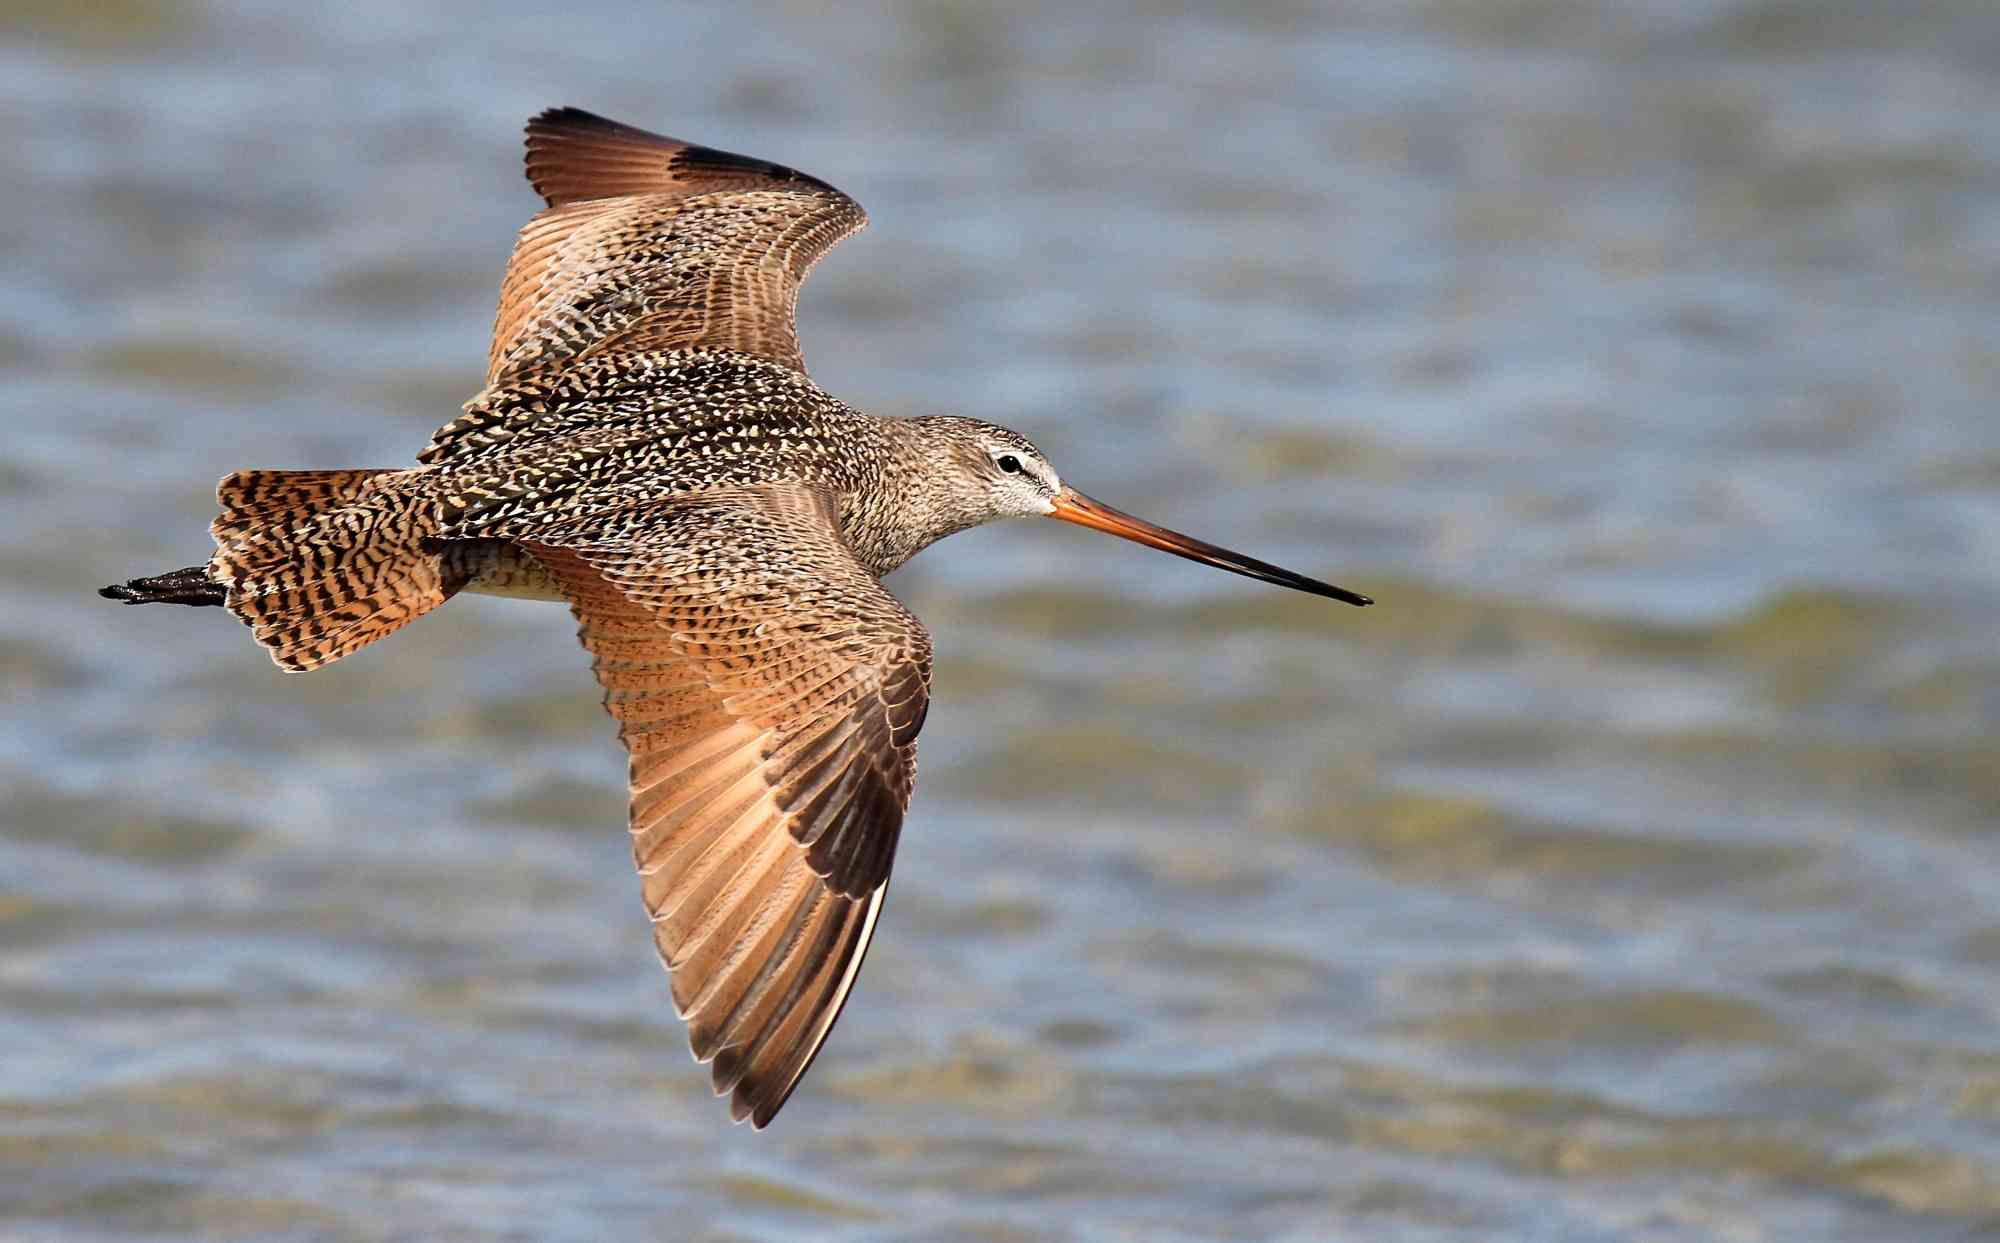 Marbled godwit in flight over water